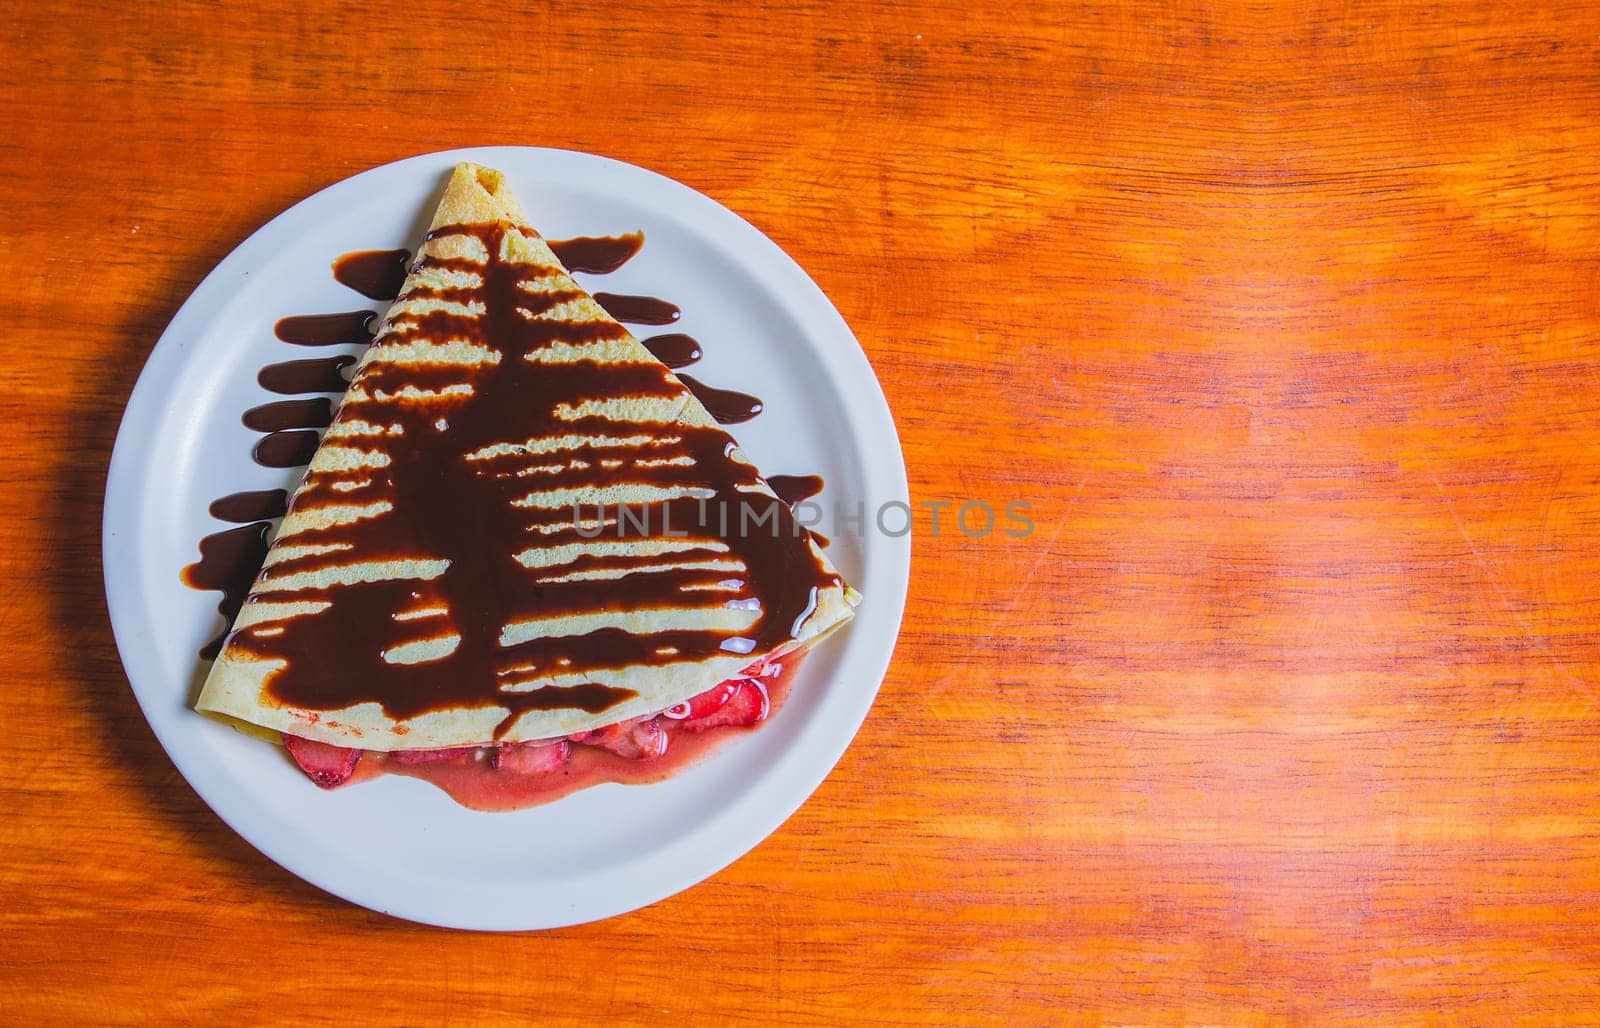 Crepe with chocolate cream and strawberry on wooden table. Sweet strawberry crepe with chocolate cream on wooden table